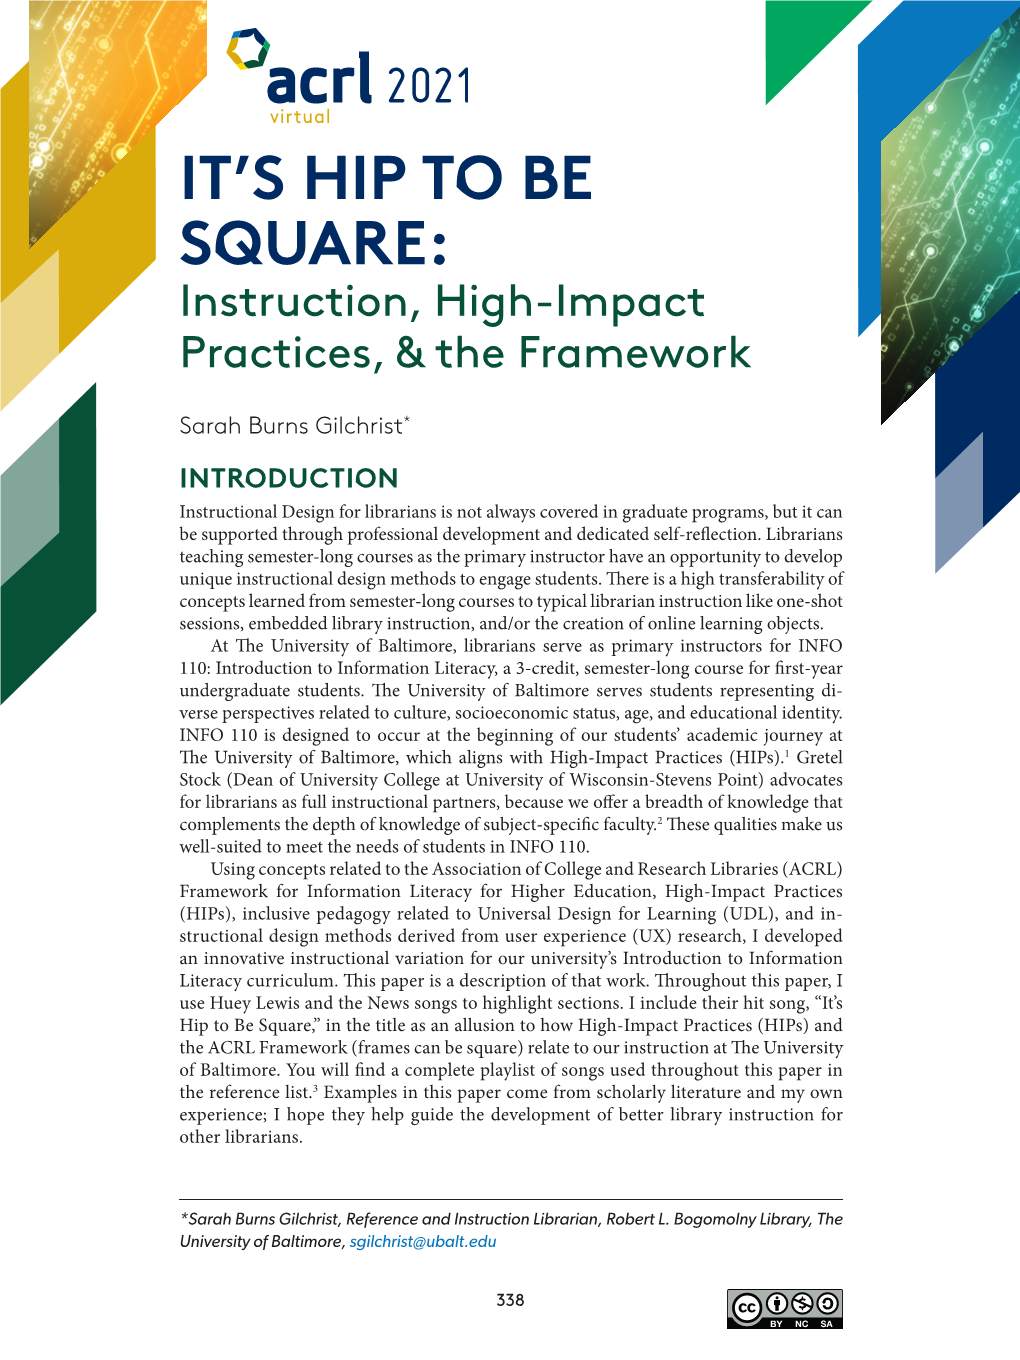 It's HIP to Be Square: Instruction, High Impact Practices, & the Framework